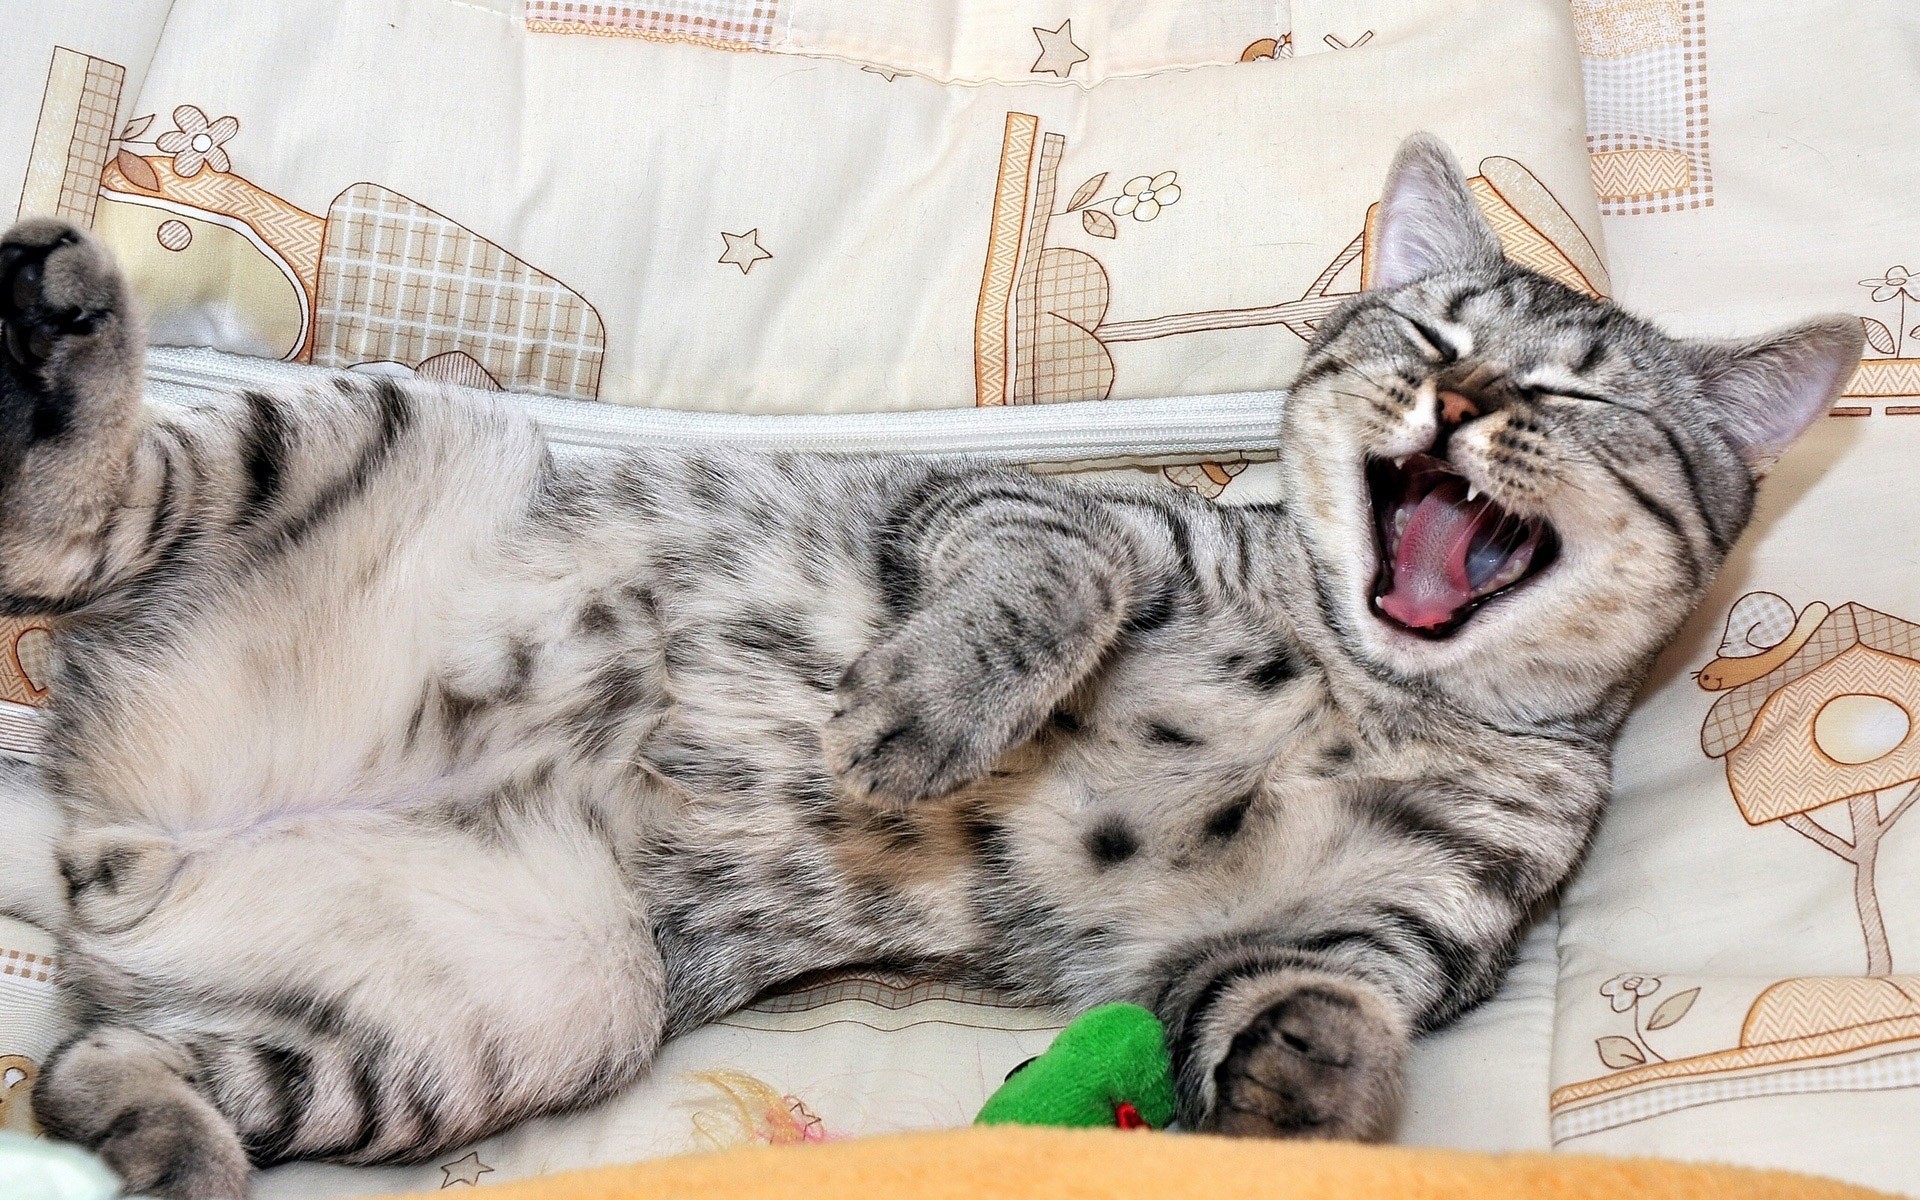 General 1920x1200 cats pet animals mammals yawning closeup open mouth tongues pointy teeth fur closed eyes